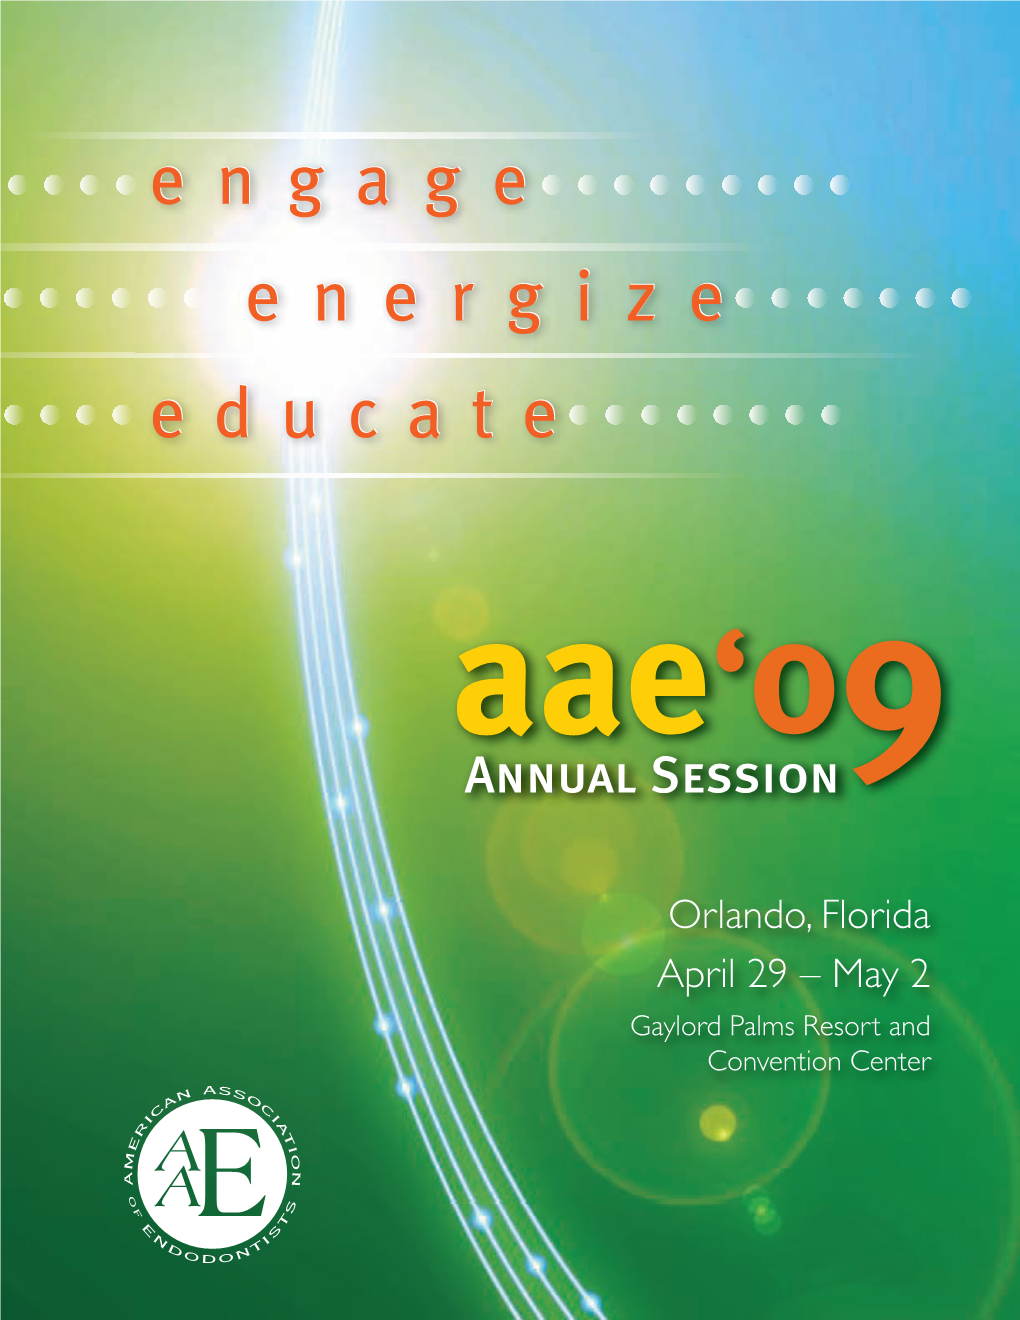 2009 Annual Session, Including Focused Workshops